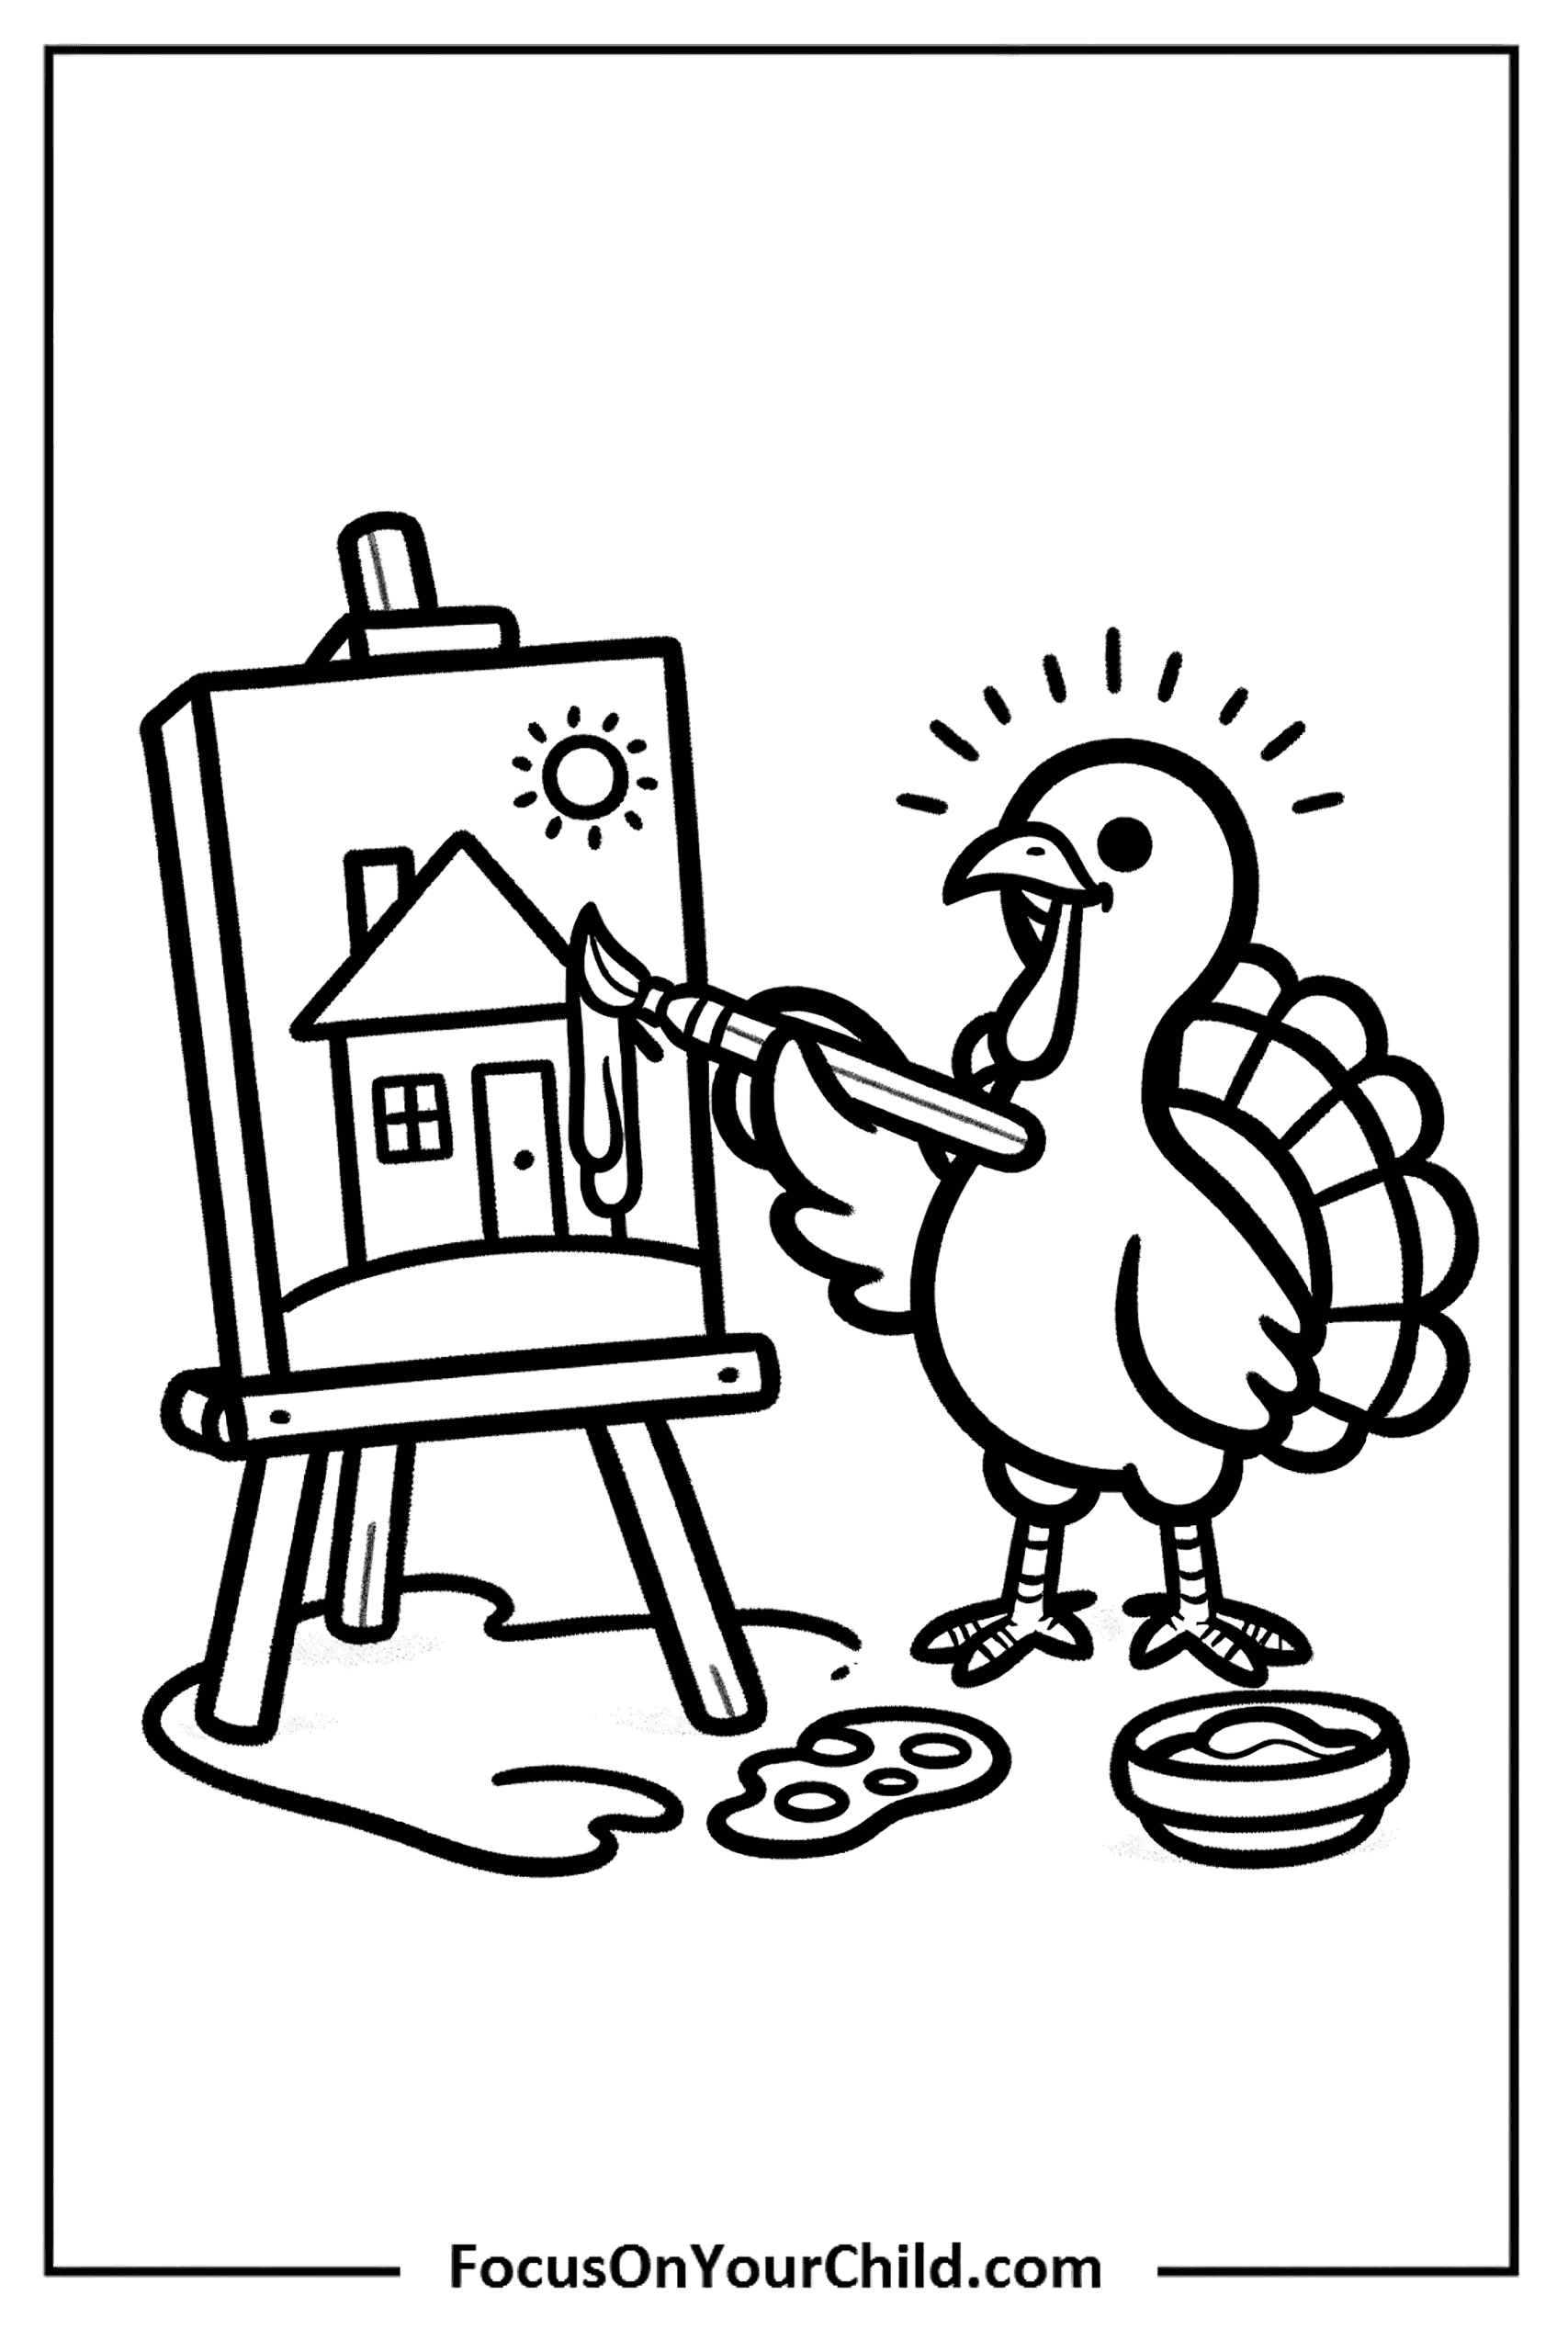 Whimsical turkey painting on canvas, promoting creativity for children.